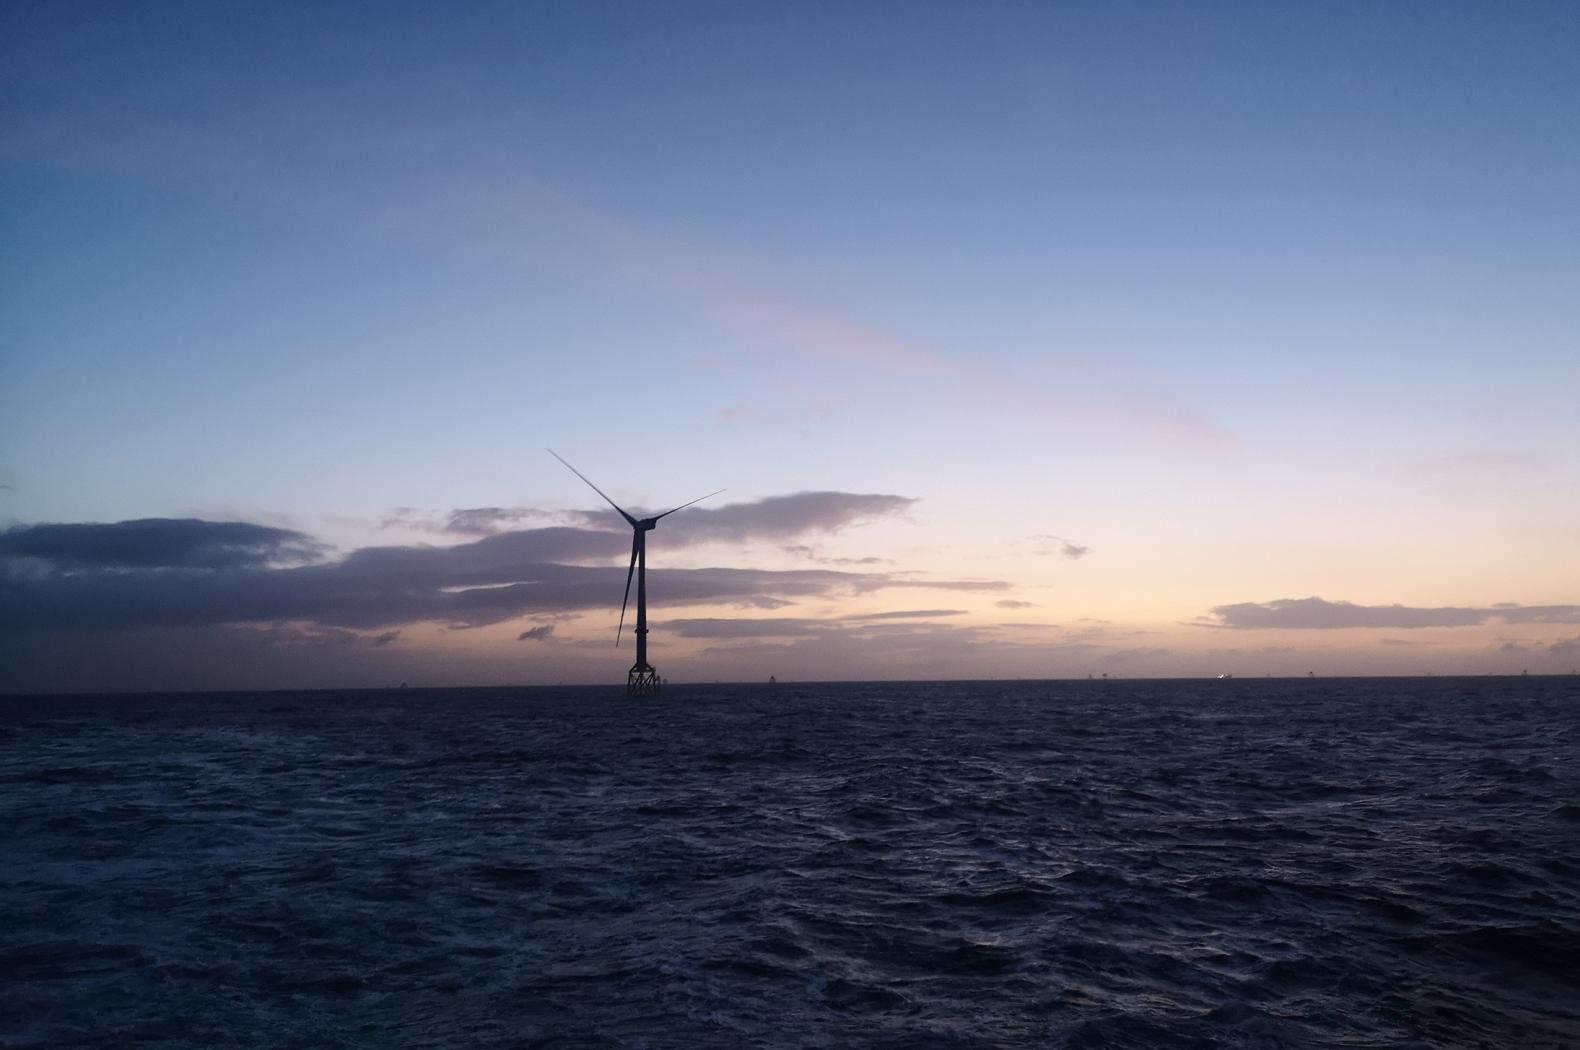 A photo of the first wind turbine at the Moray East offshore wind farm in the UK